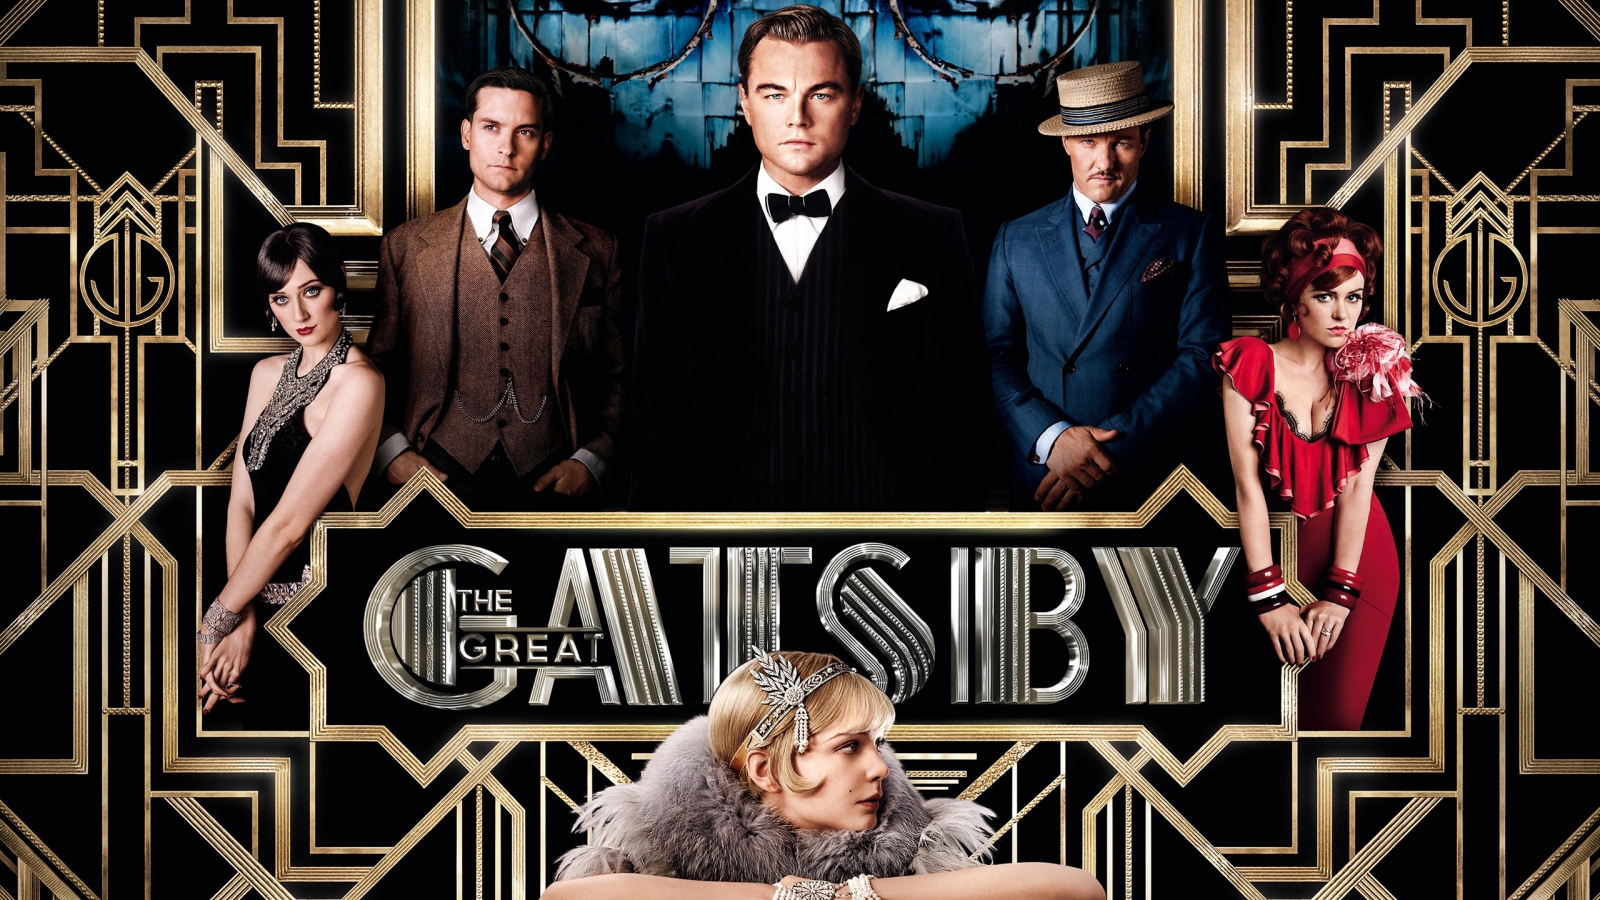 The Great Gatsby Movie for 1600 x 900 HDTV resolution